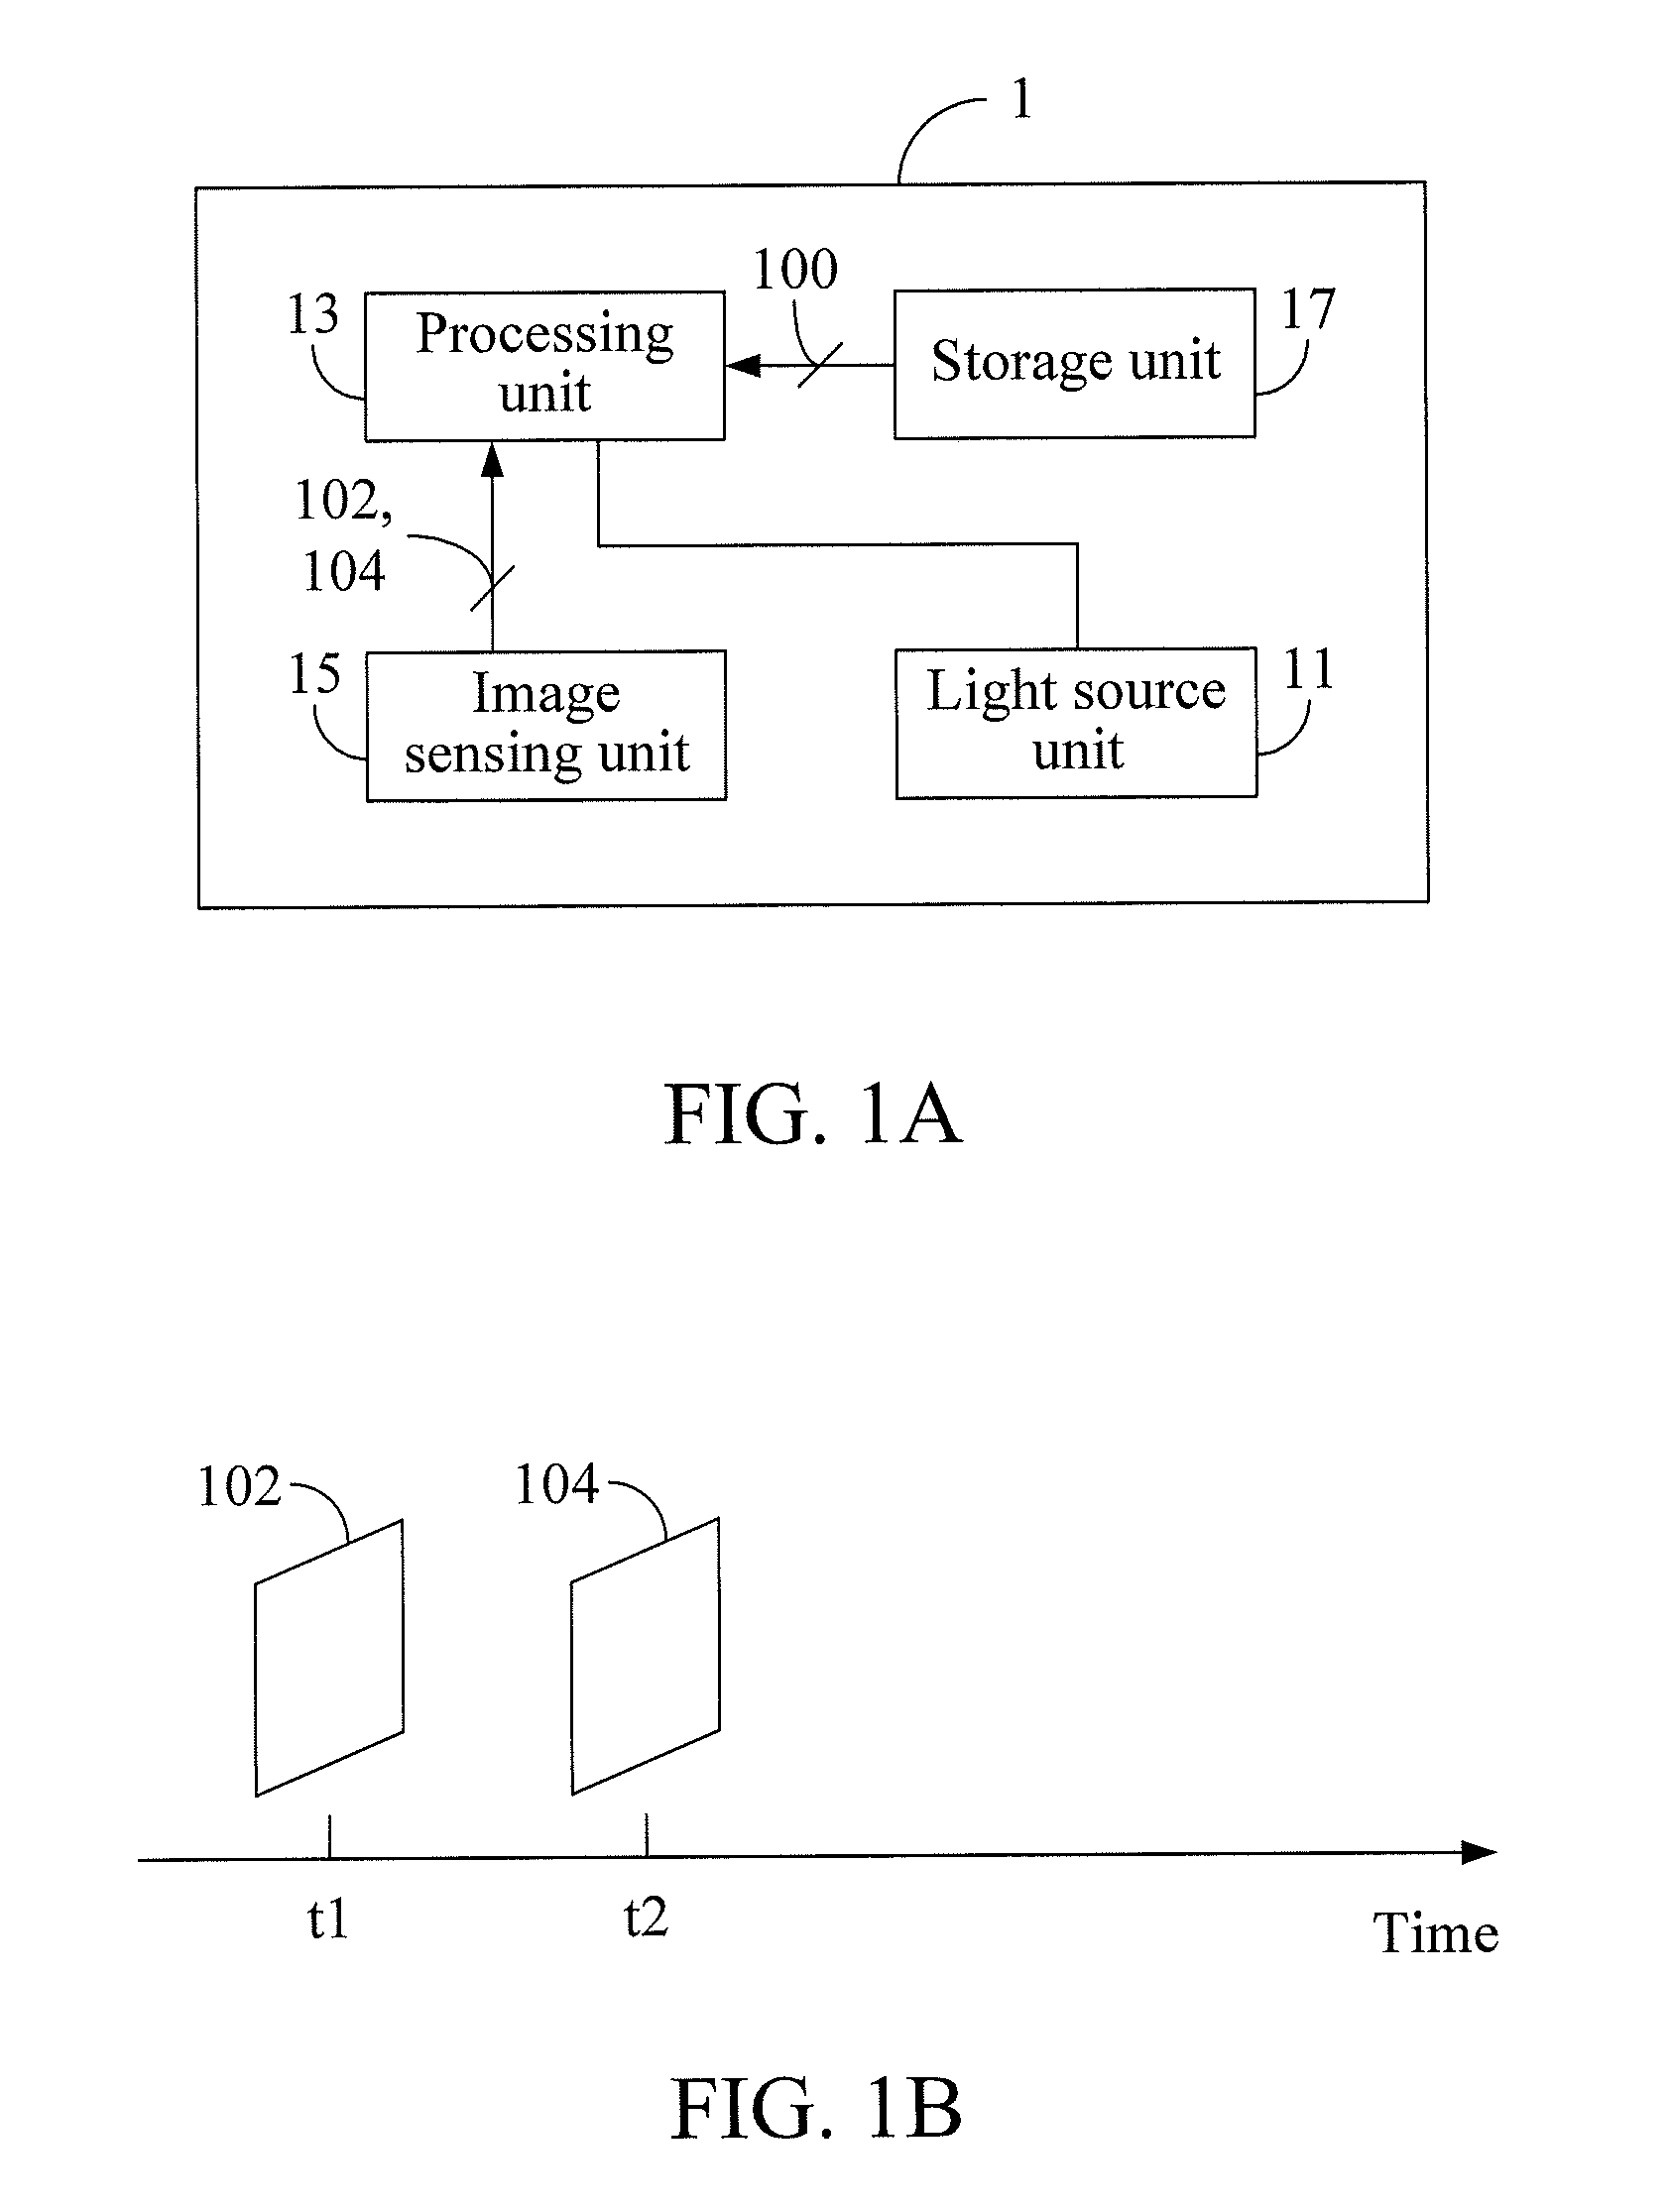 Optical navigation apparatus calculating an image quality index to determine a matching block size